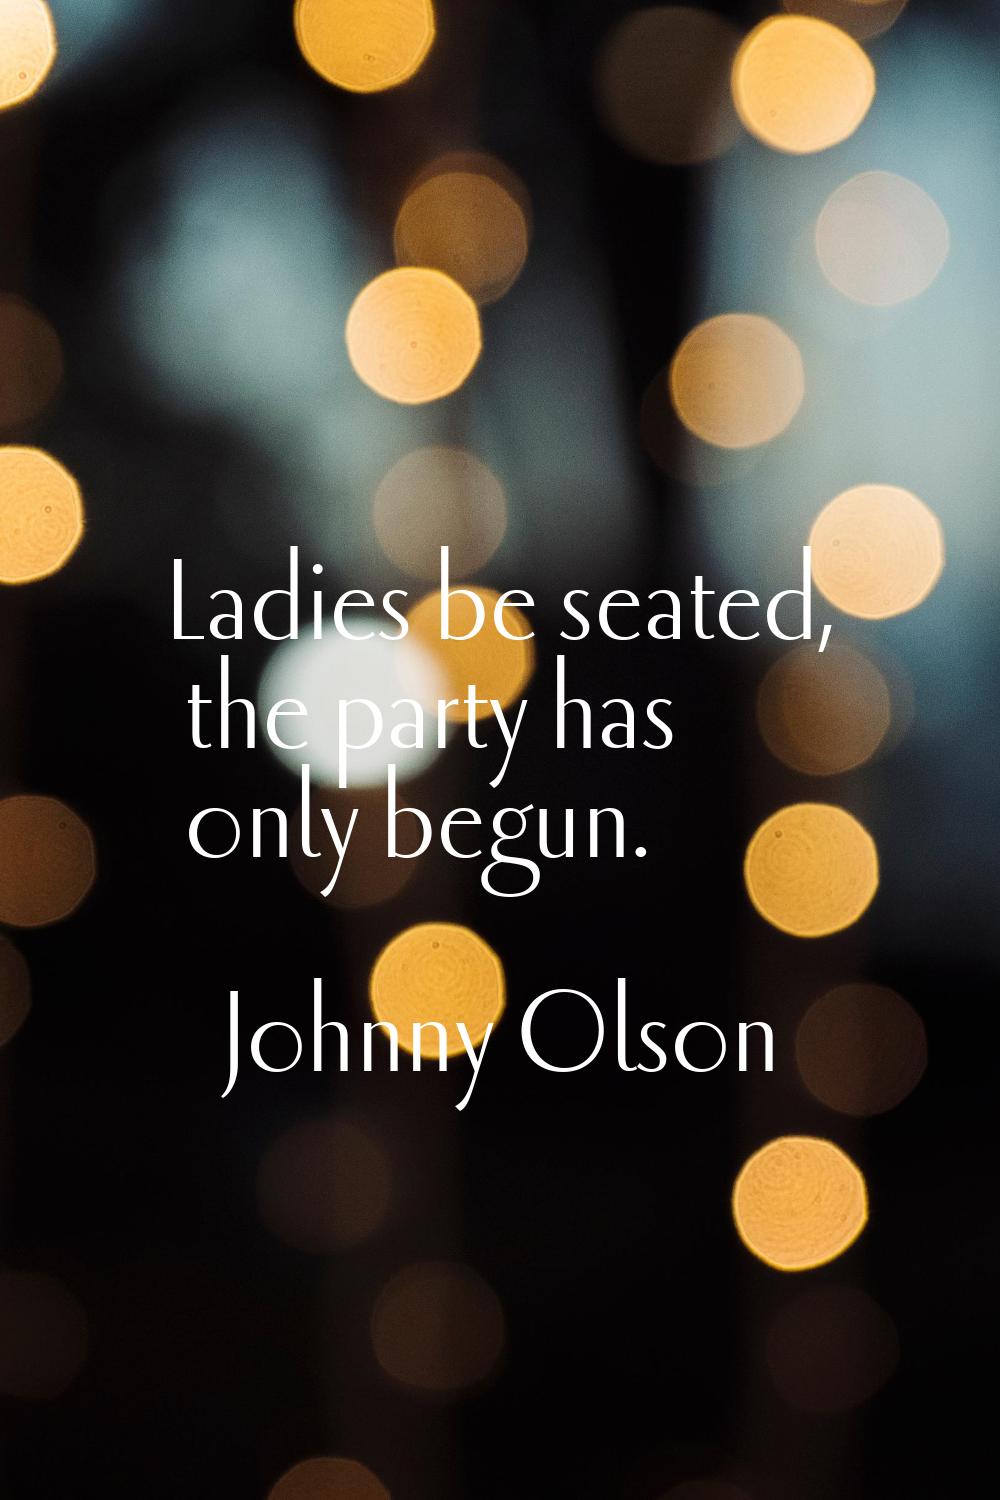 Ladies be seated, the party has only begun.